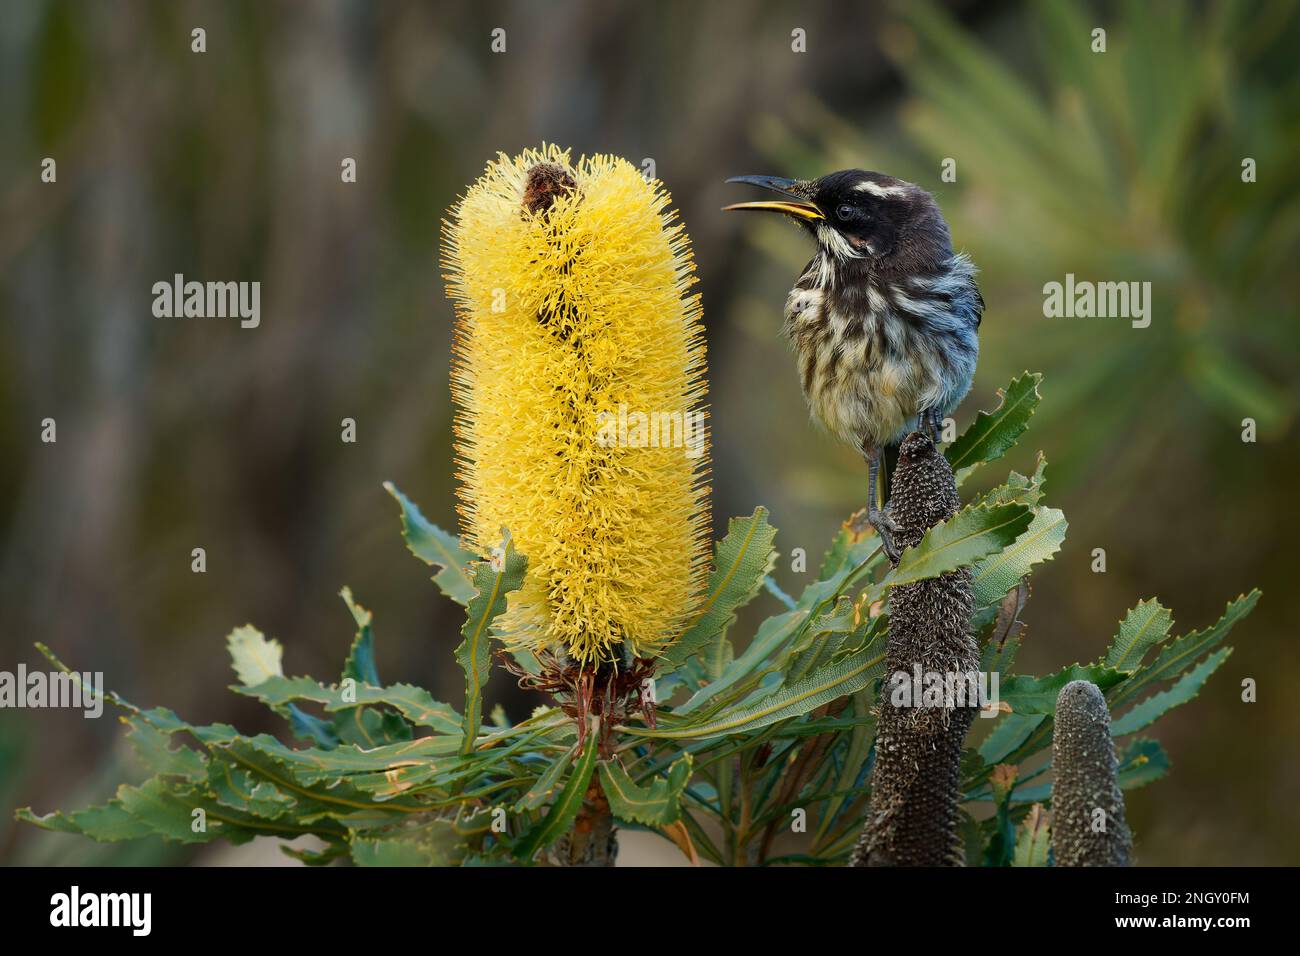 New Holland Honeyeater - Phylidonyris novaehollandiae - young australian bird with yellow color in the wings feeding on nectar on the yellow banksia b Stock Photo